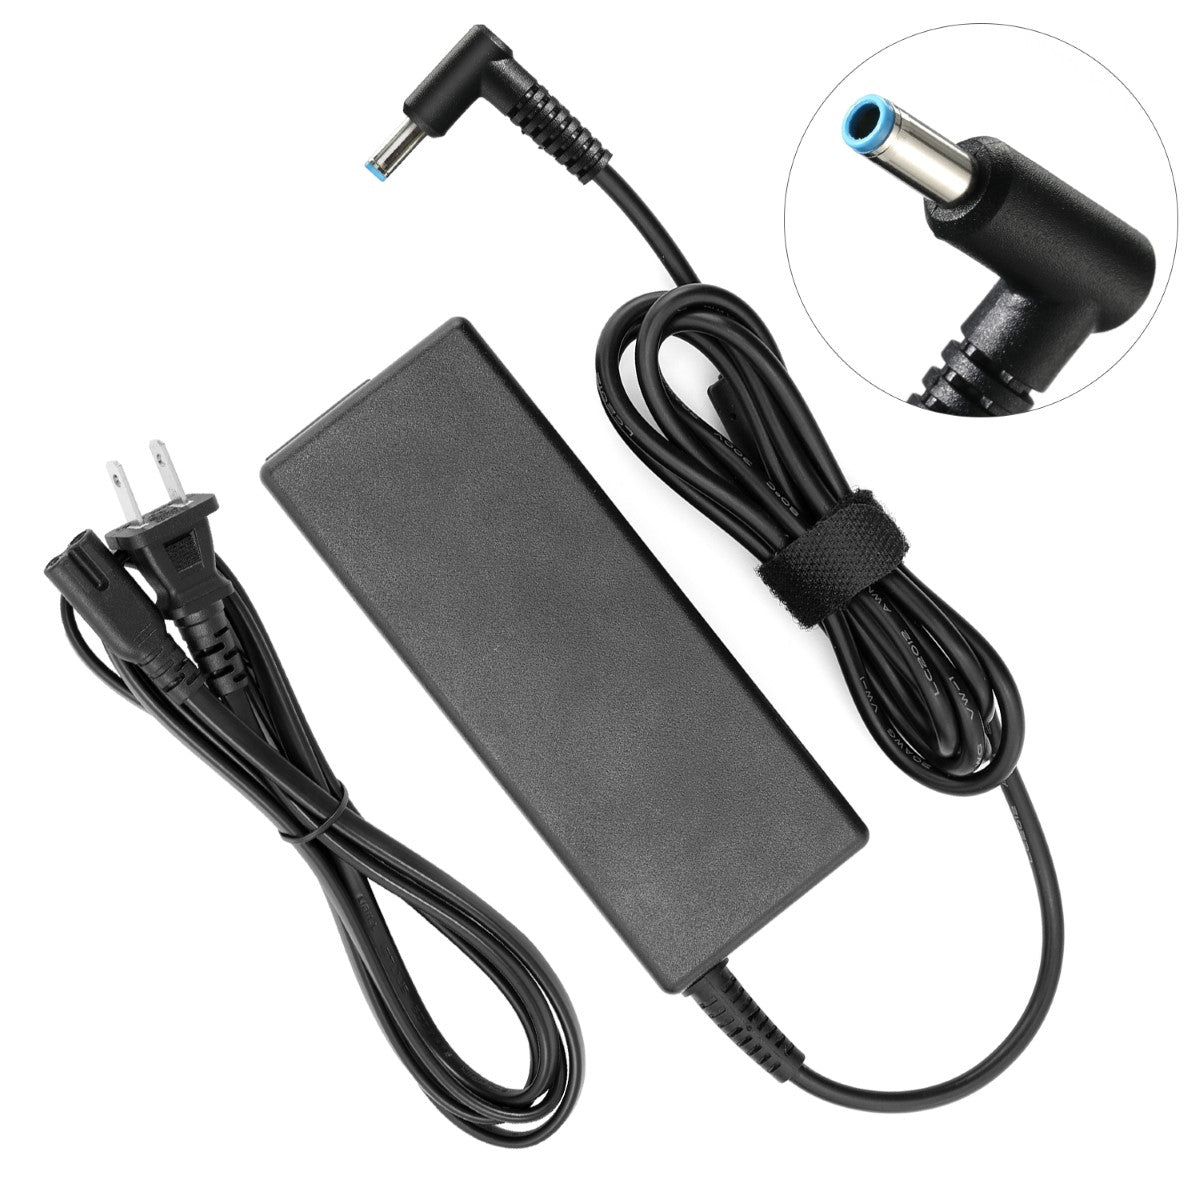 AC Adapter Charger for HP Envy TouchSmart 15-j053cl Notebook.